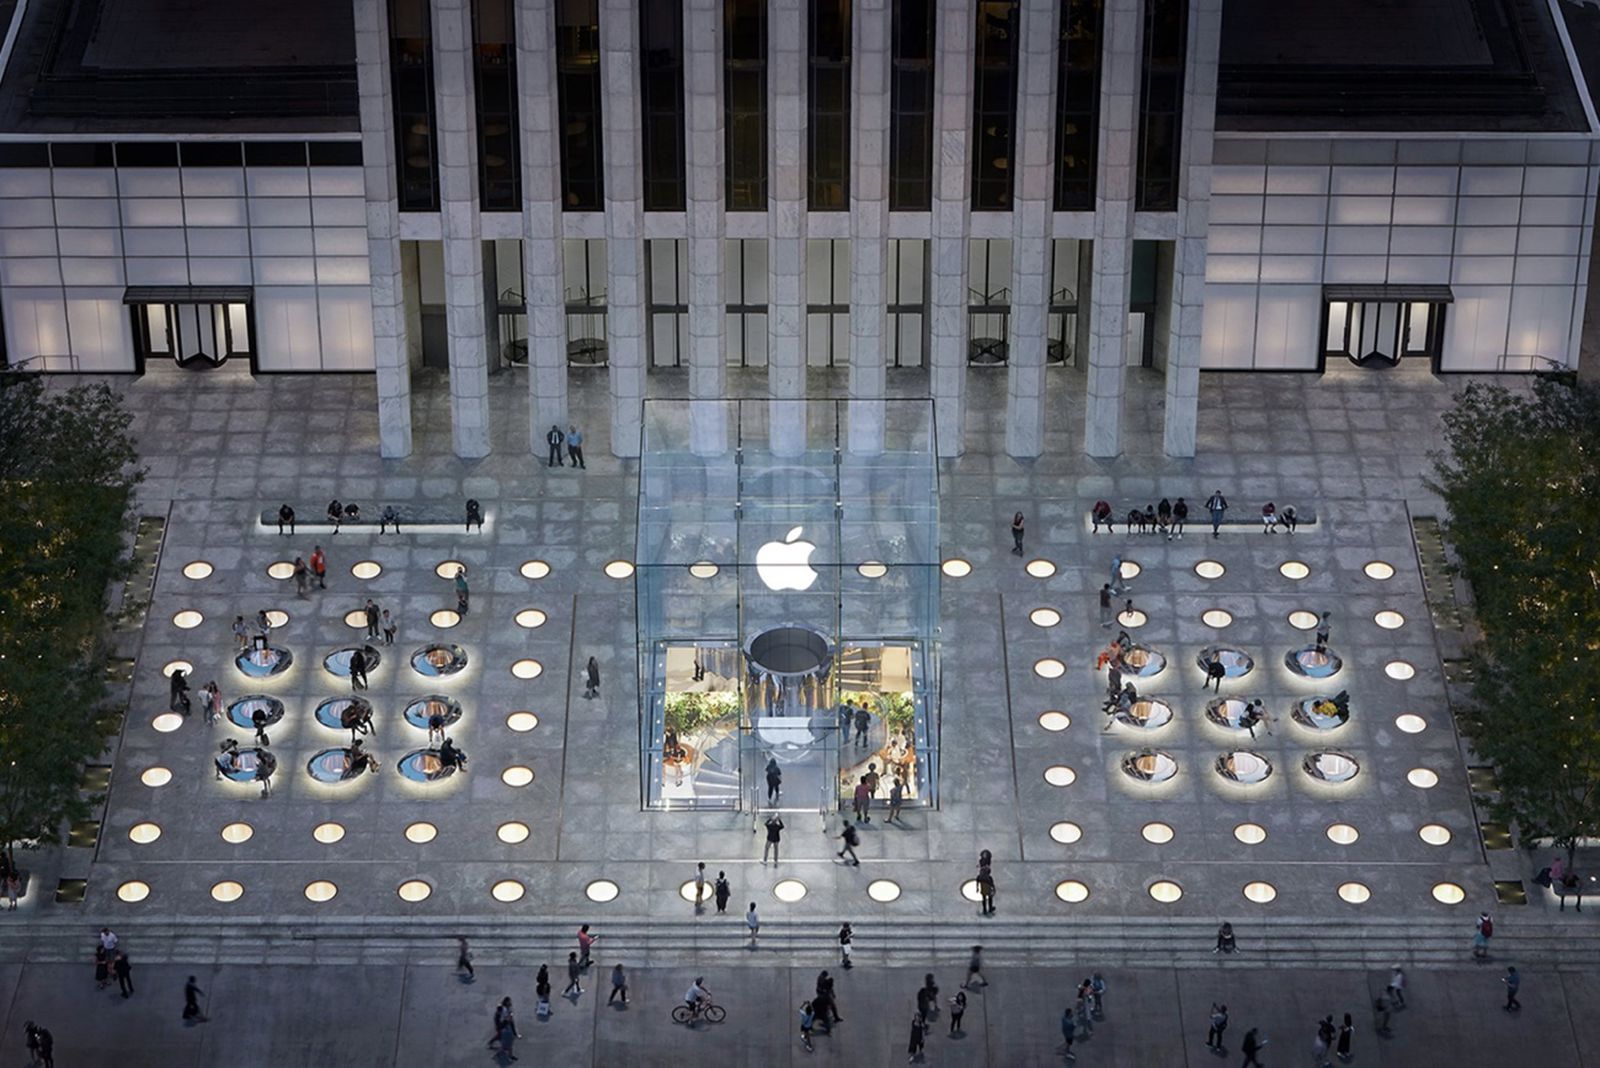 Man Robbed After Buying 300 iPhones From Apple Fifth Avenue